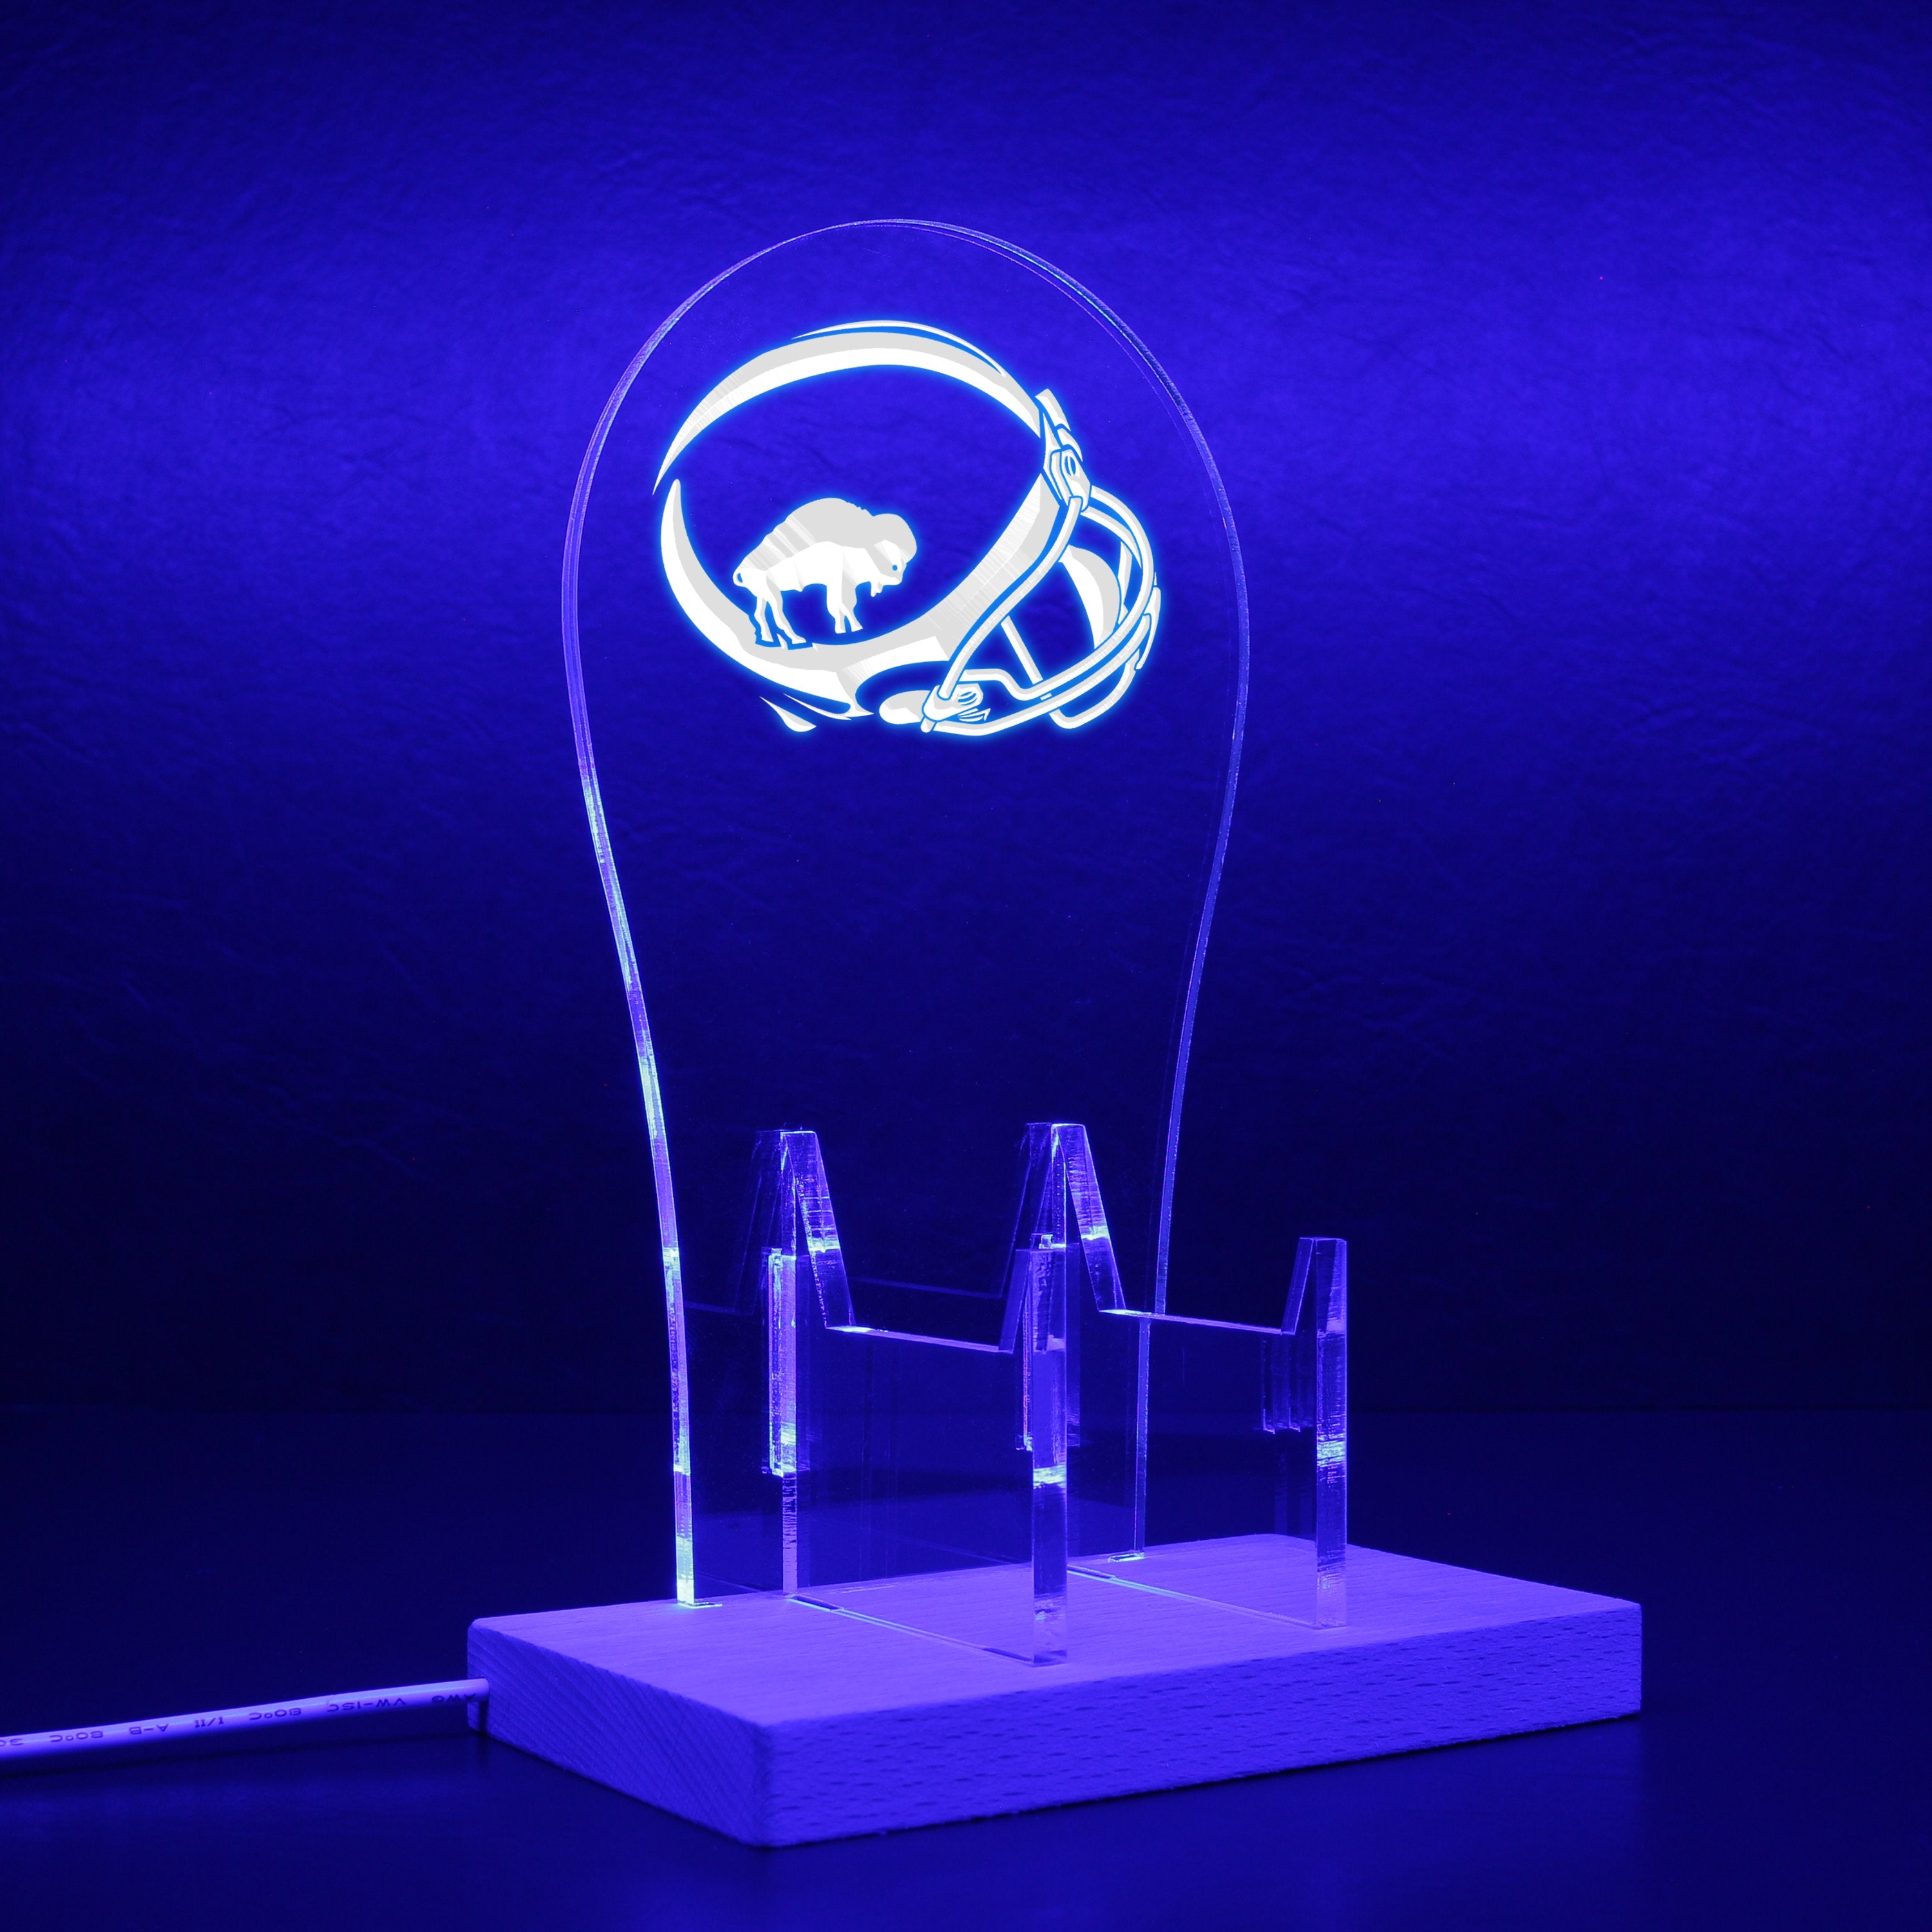 Buffalo Bills helmet logo in use from 1965-1973 RGB LED Gaming Headset Controller Stand